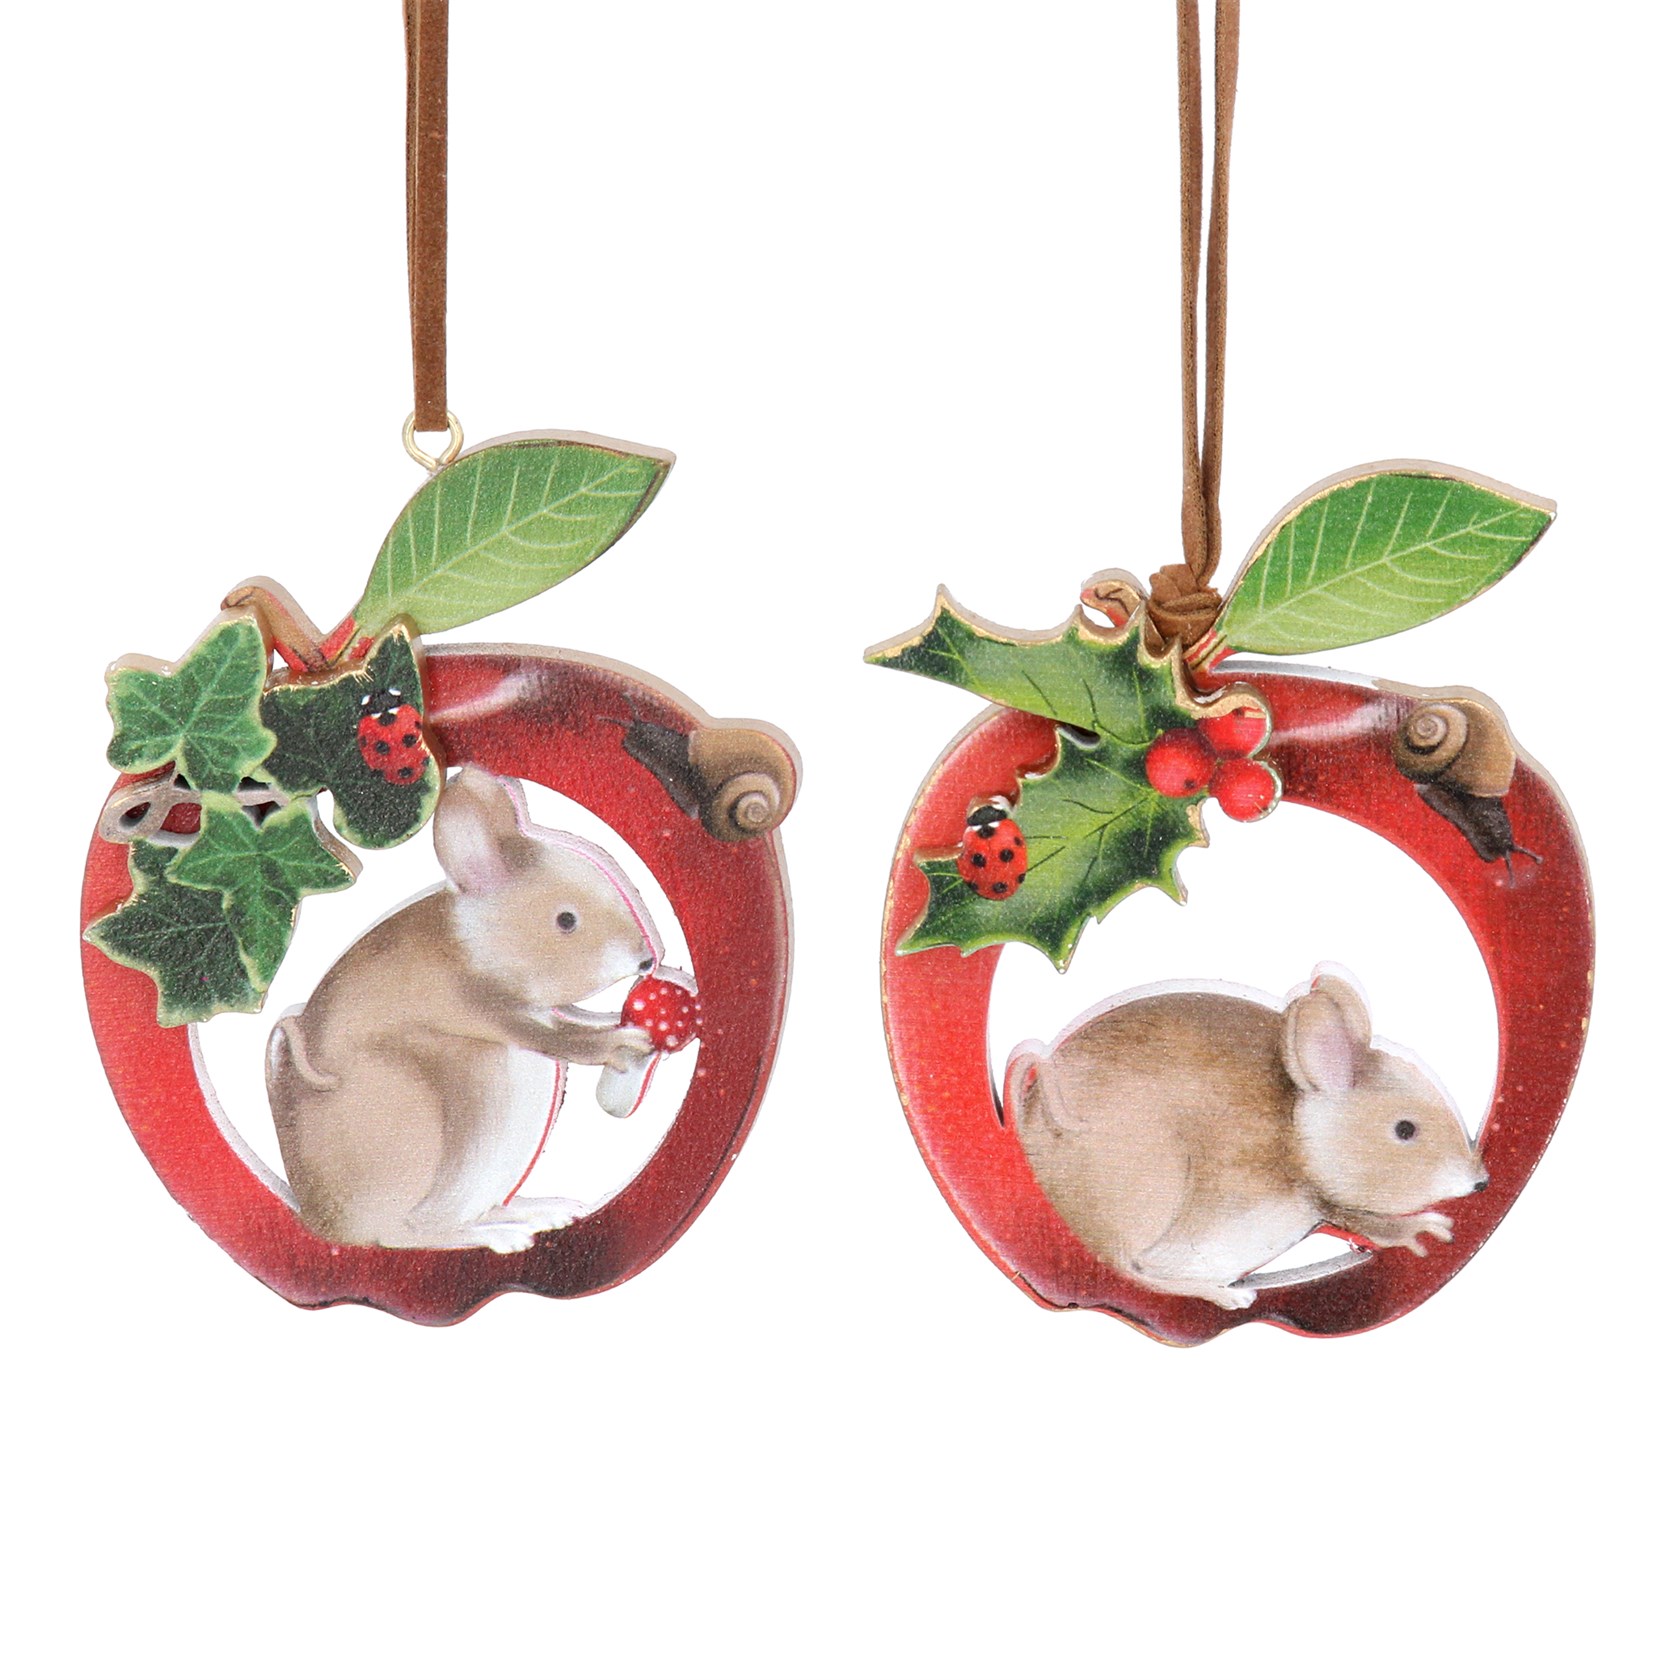 Wooden mouse in apple hanging Christmas decoration. By Gisela Graham. The perfect festive addition to your home.